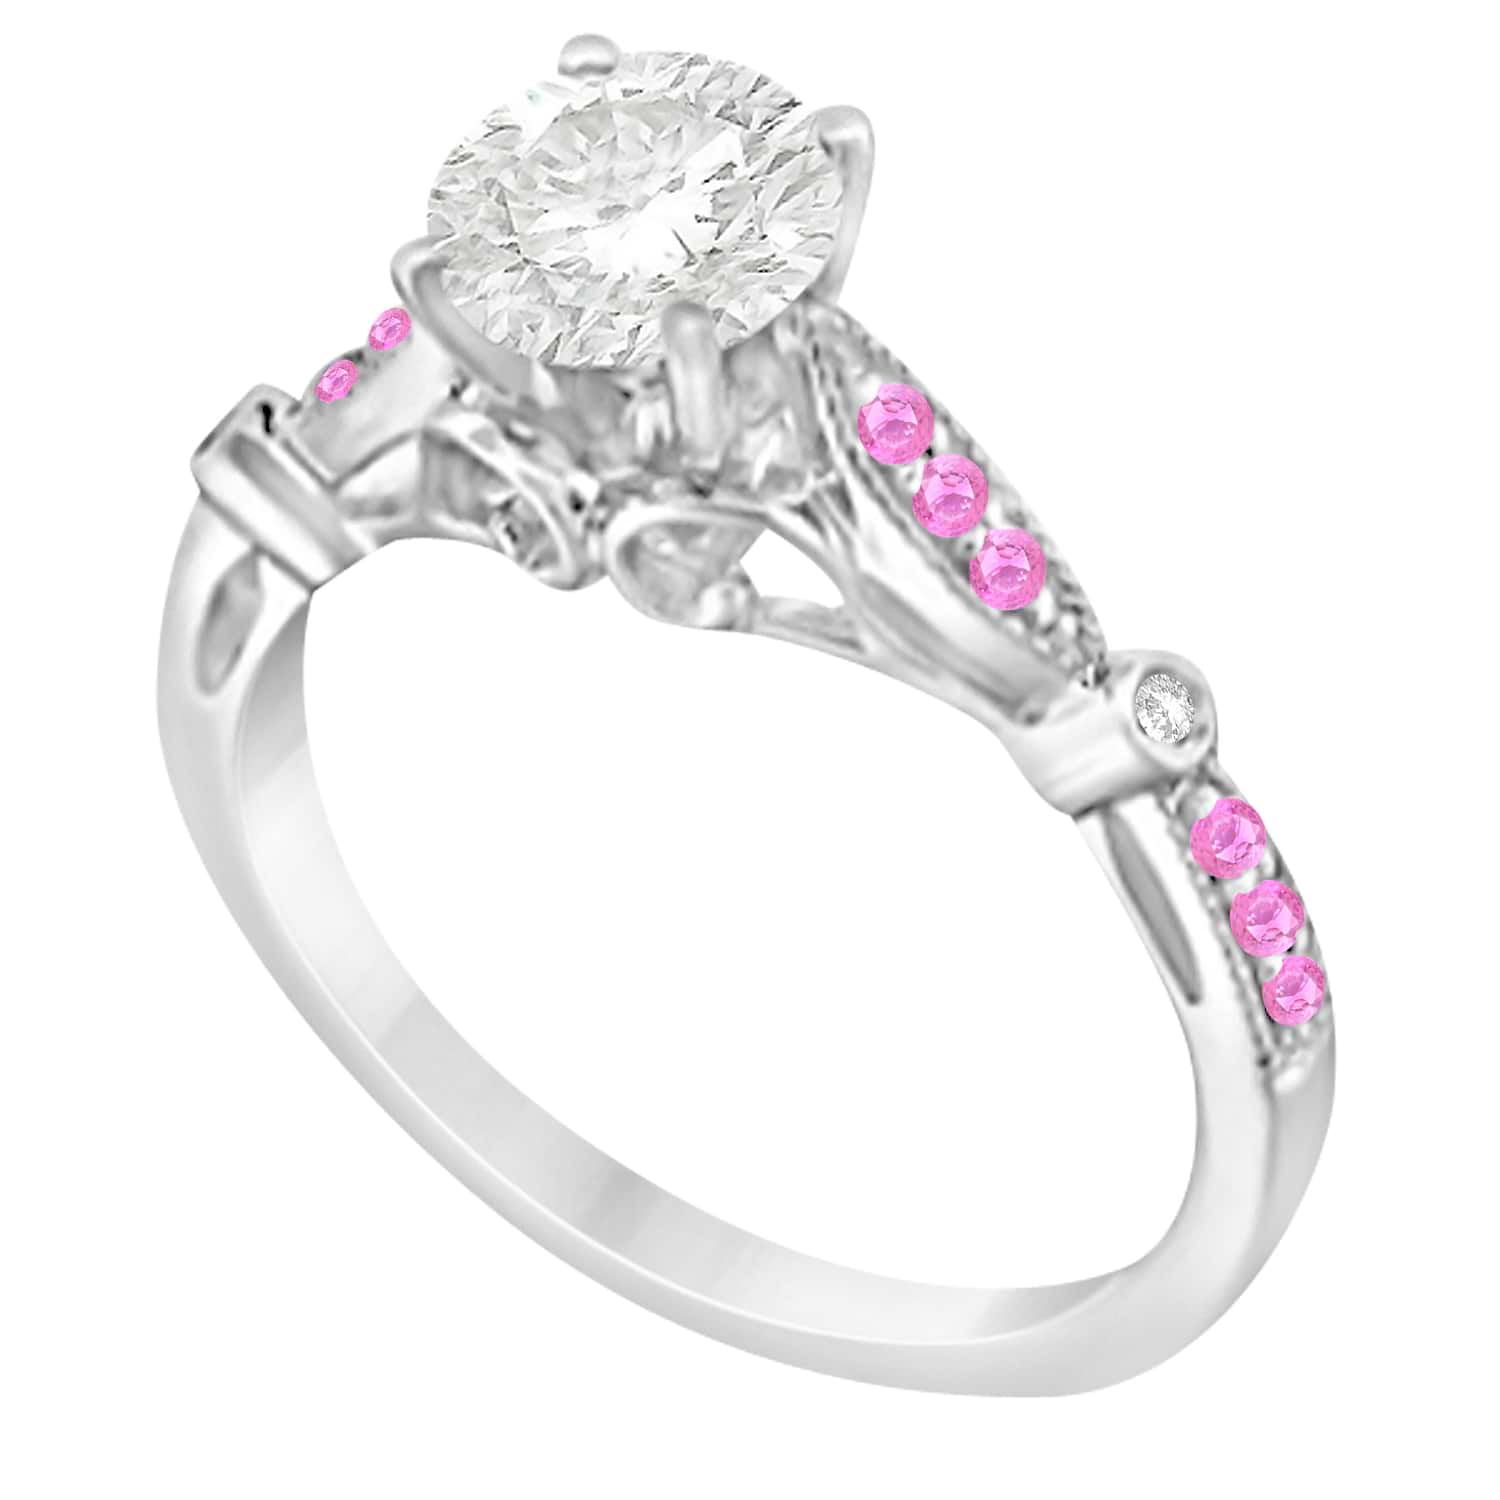 Marquise & Dot Pink Sapphire Vintage Engagement Ring 14k White Gold 0.13ct